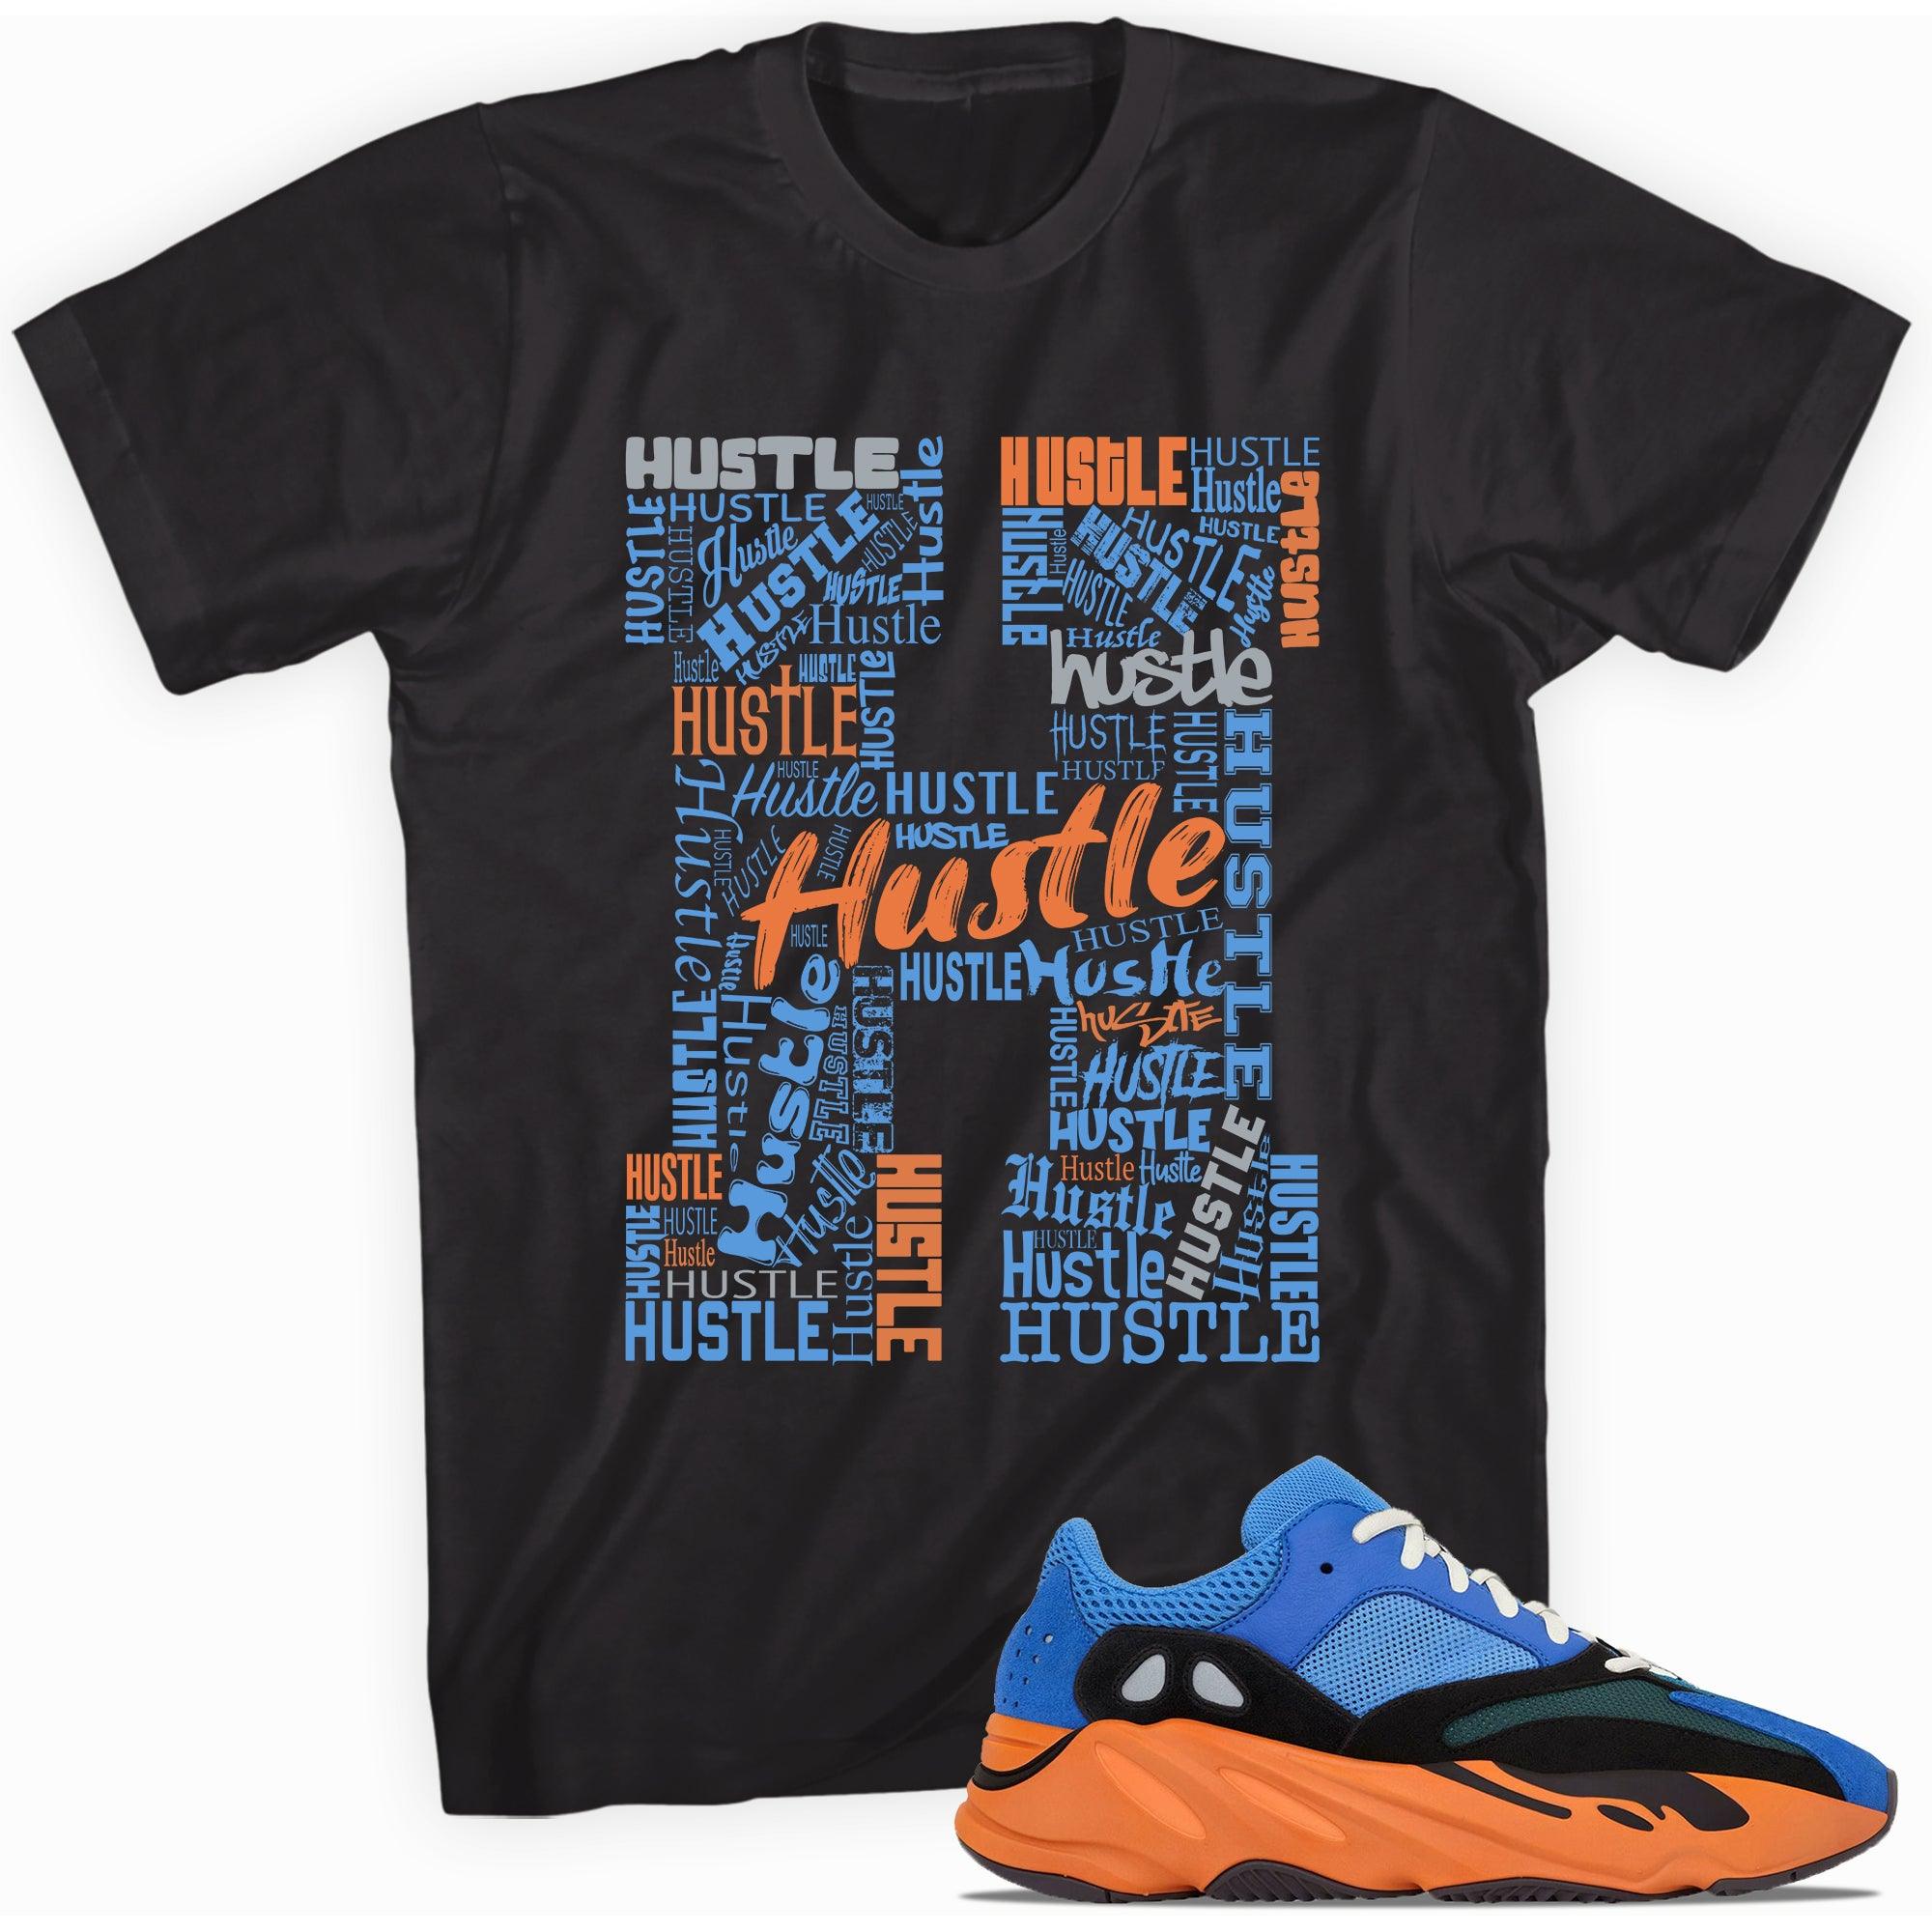 Black H for Hustle Shirt Yeezy Boost 700s Bright Blue photo